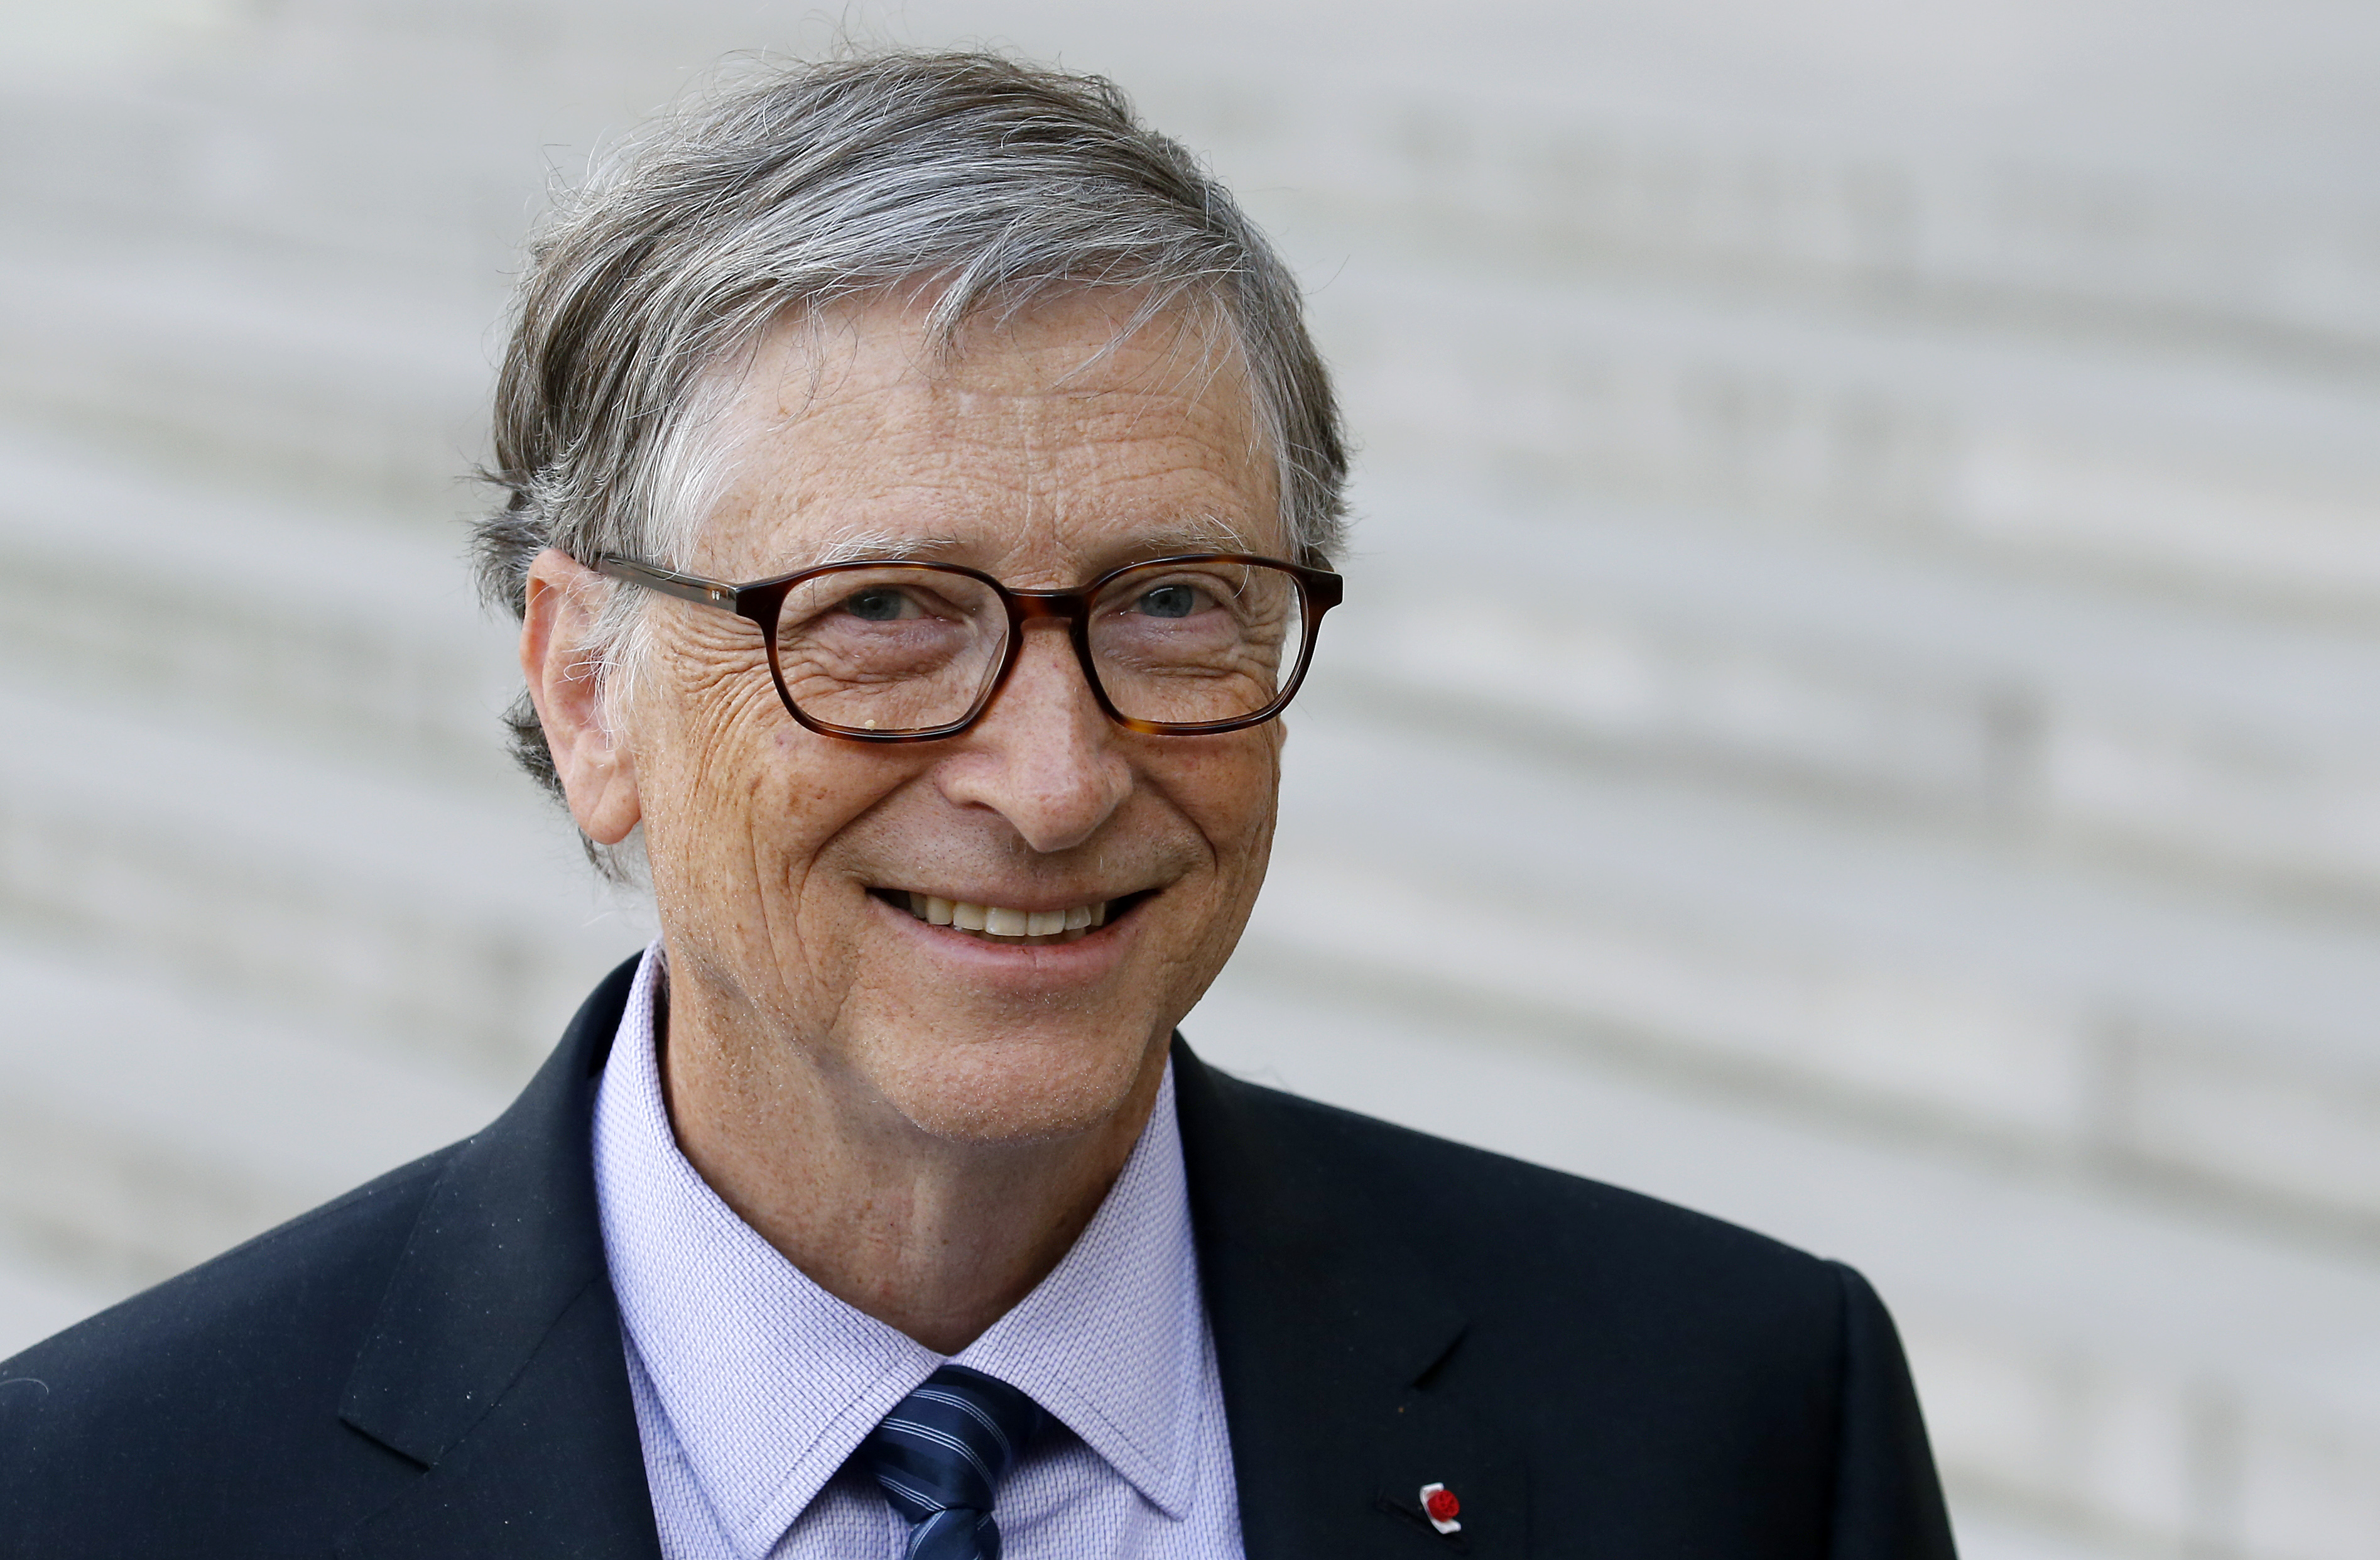 Bill Gates Talks About Eradicating Poverty in Africa | Time